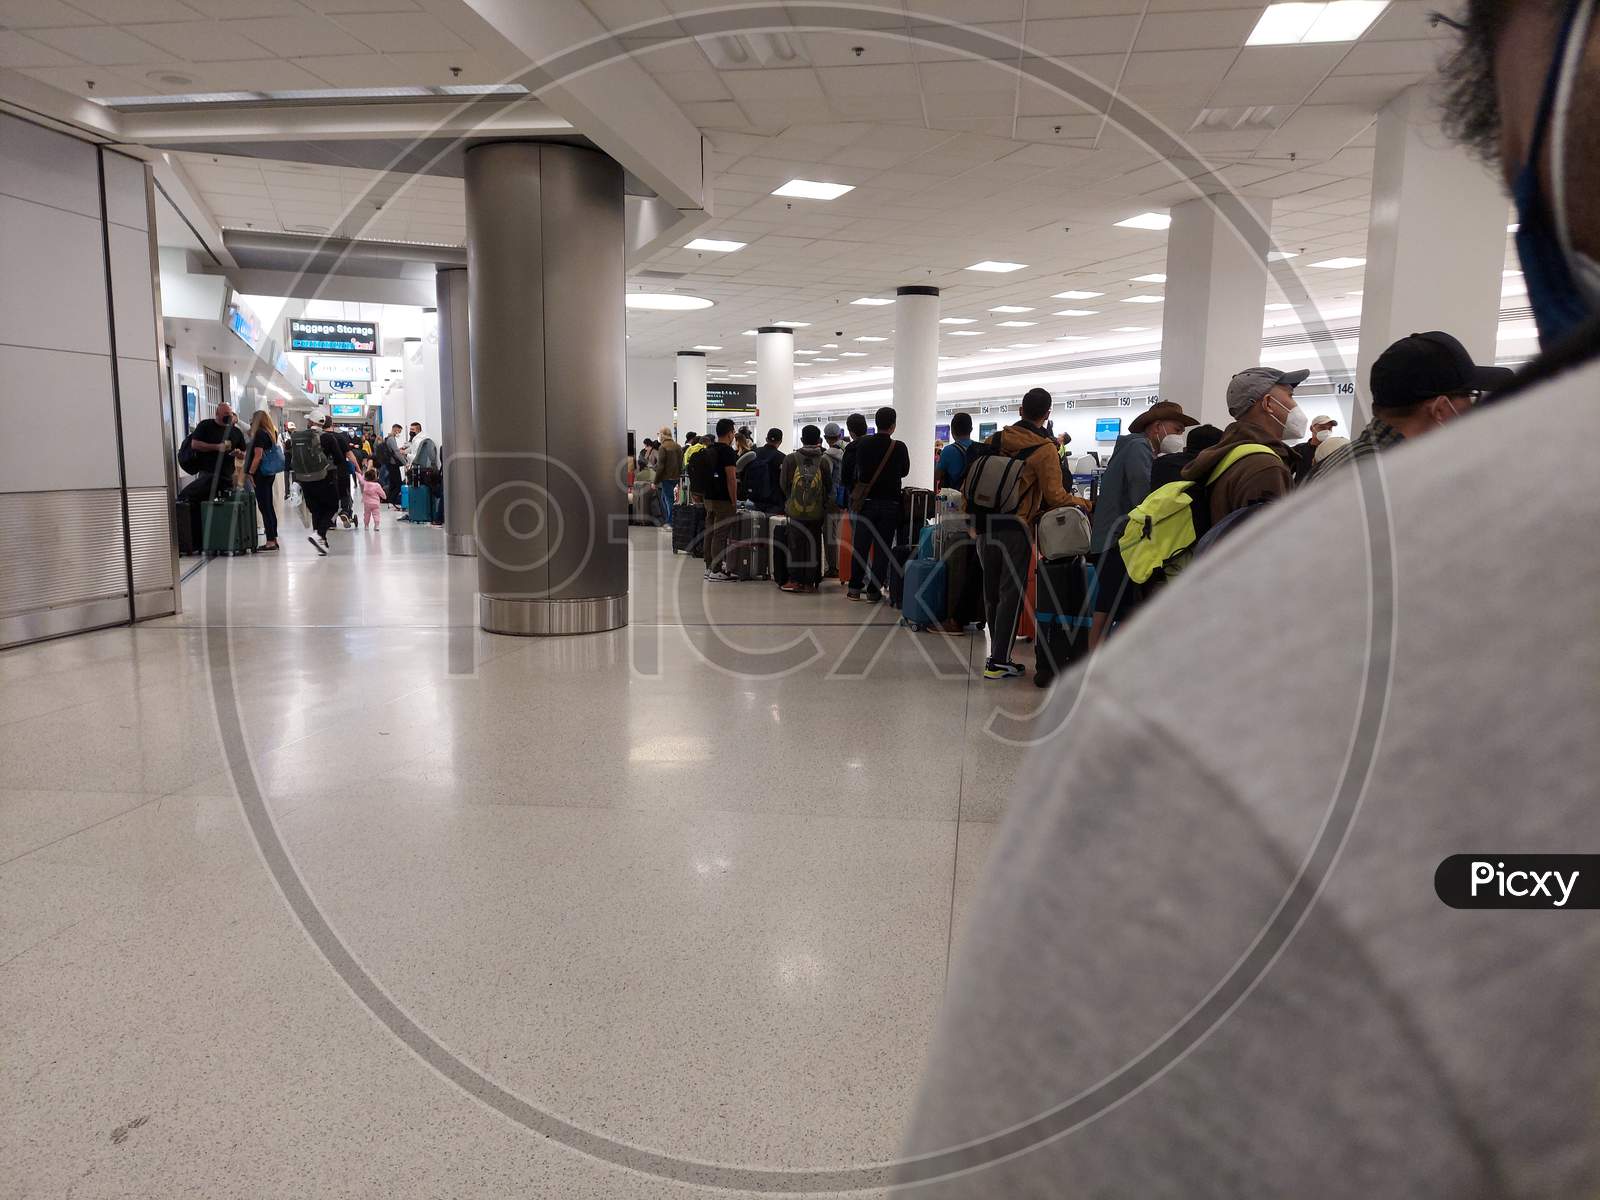 Miami United States Feb 16 2022 , A View From Miami International Airport Crowded People During Pandemic